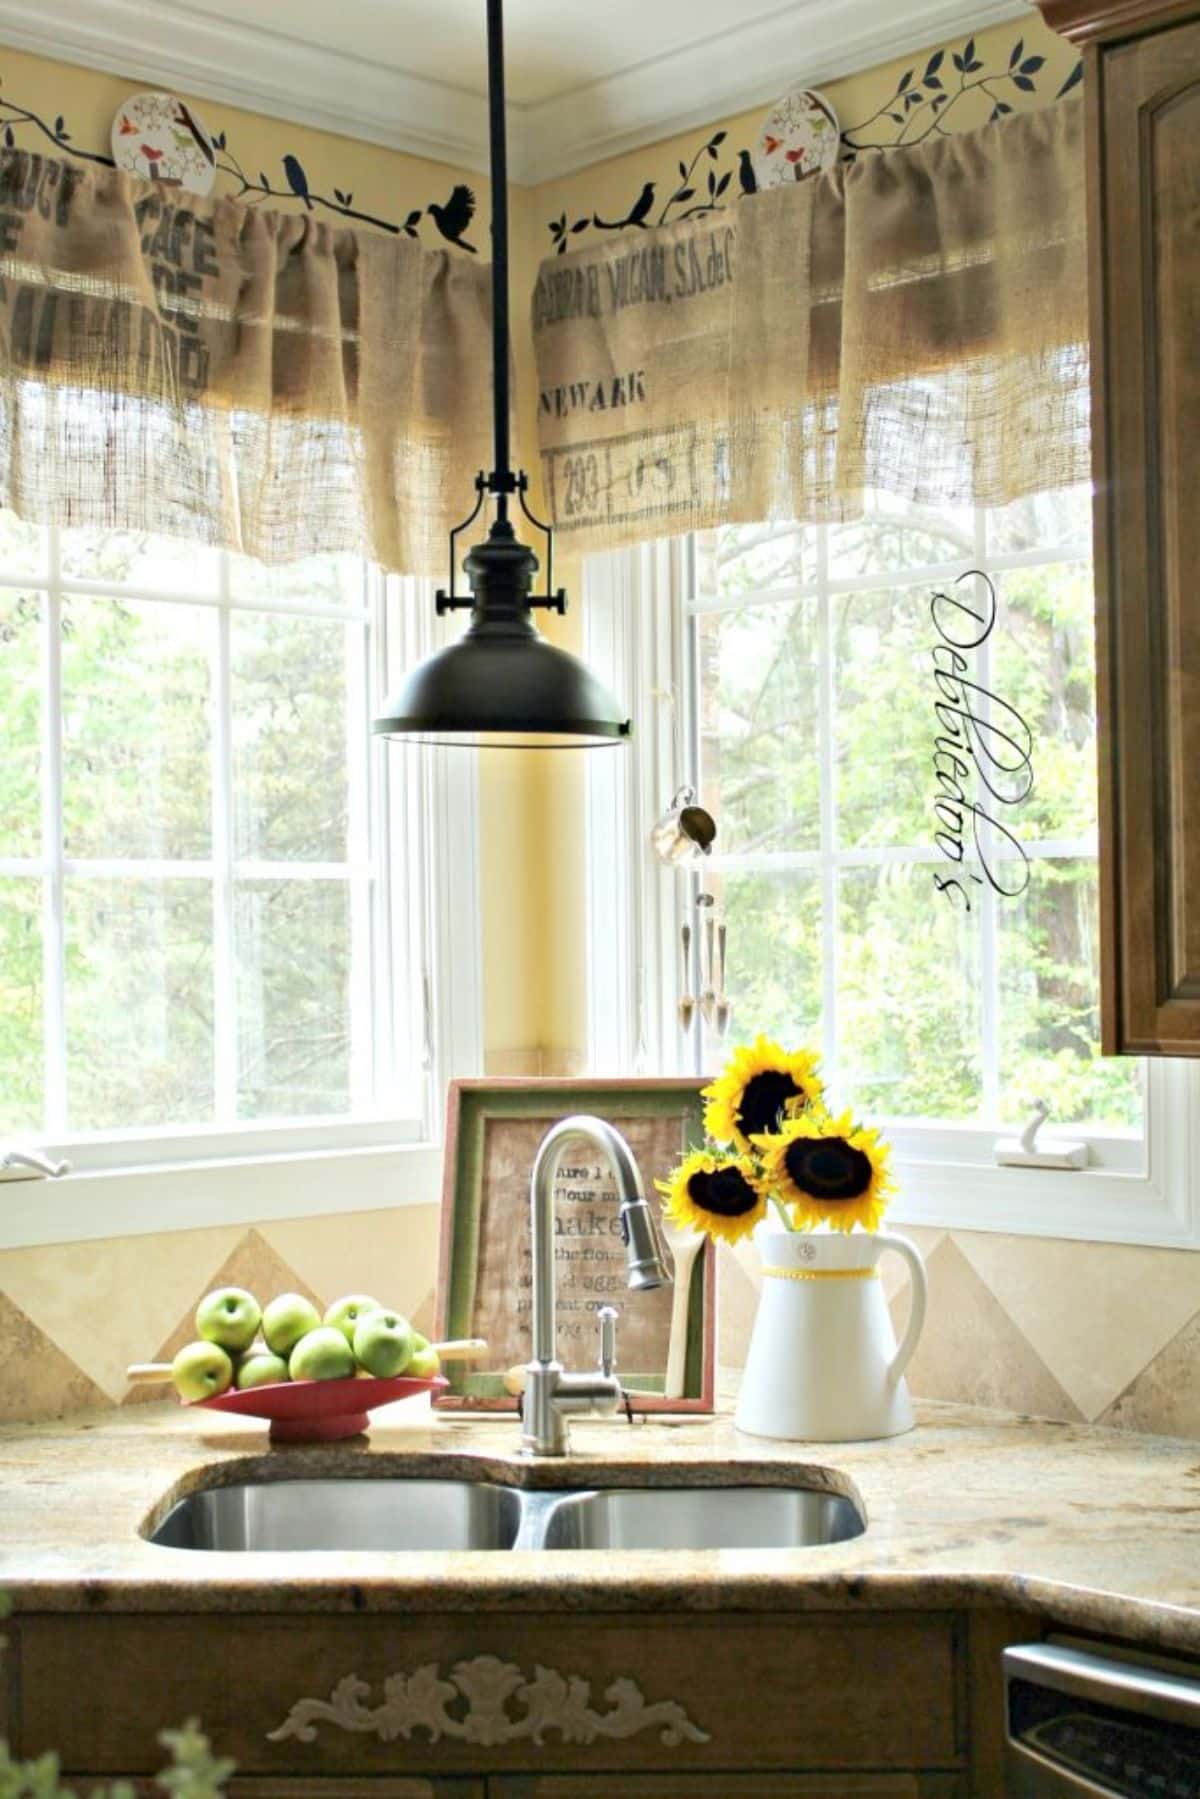 DIY No Sew Burlap Kitchen Valances...Made From Coffee Bags!